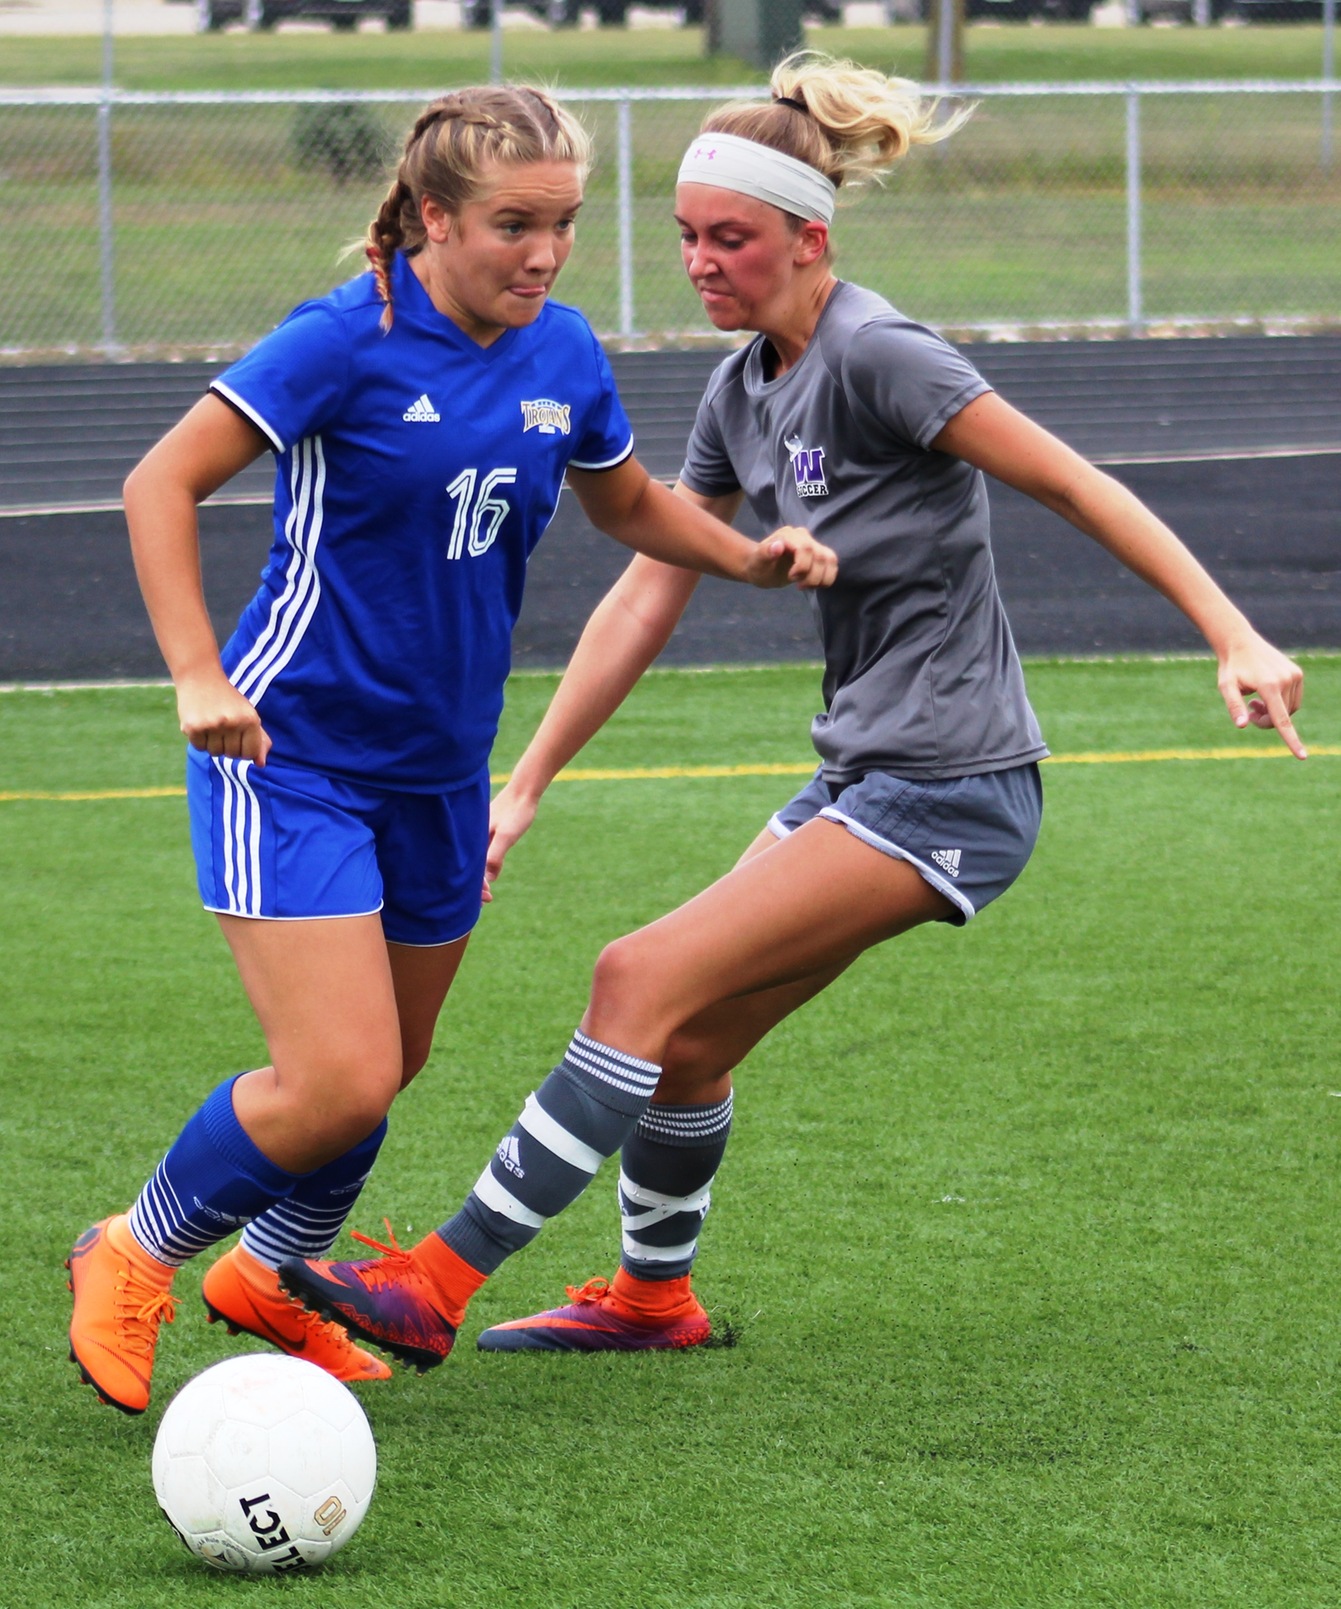 Cici Novotney moves the ball down the field in scrimmage against Waldorf University earlier this season.